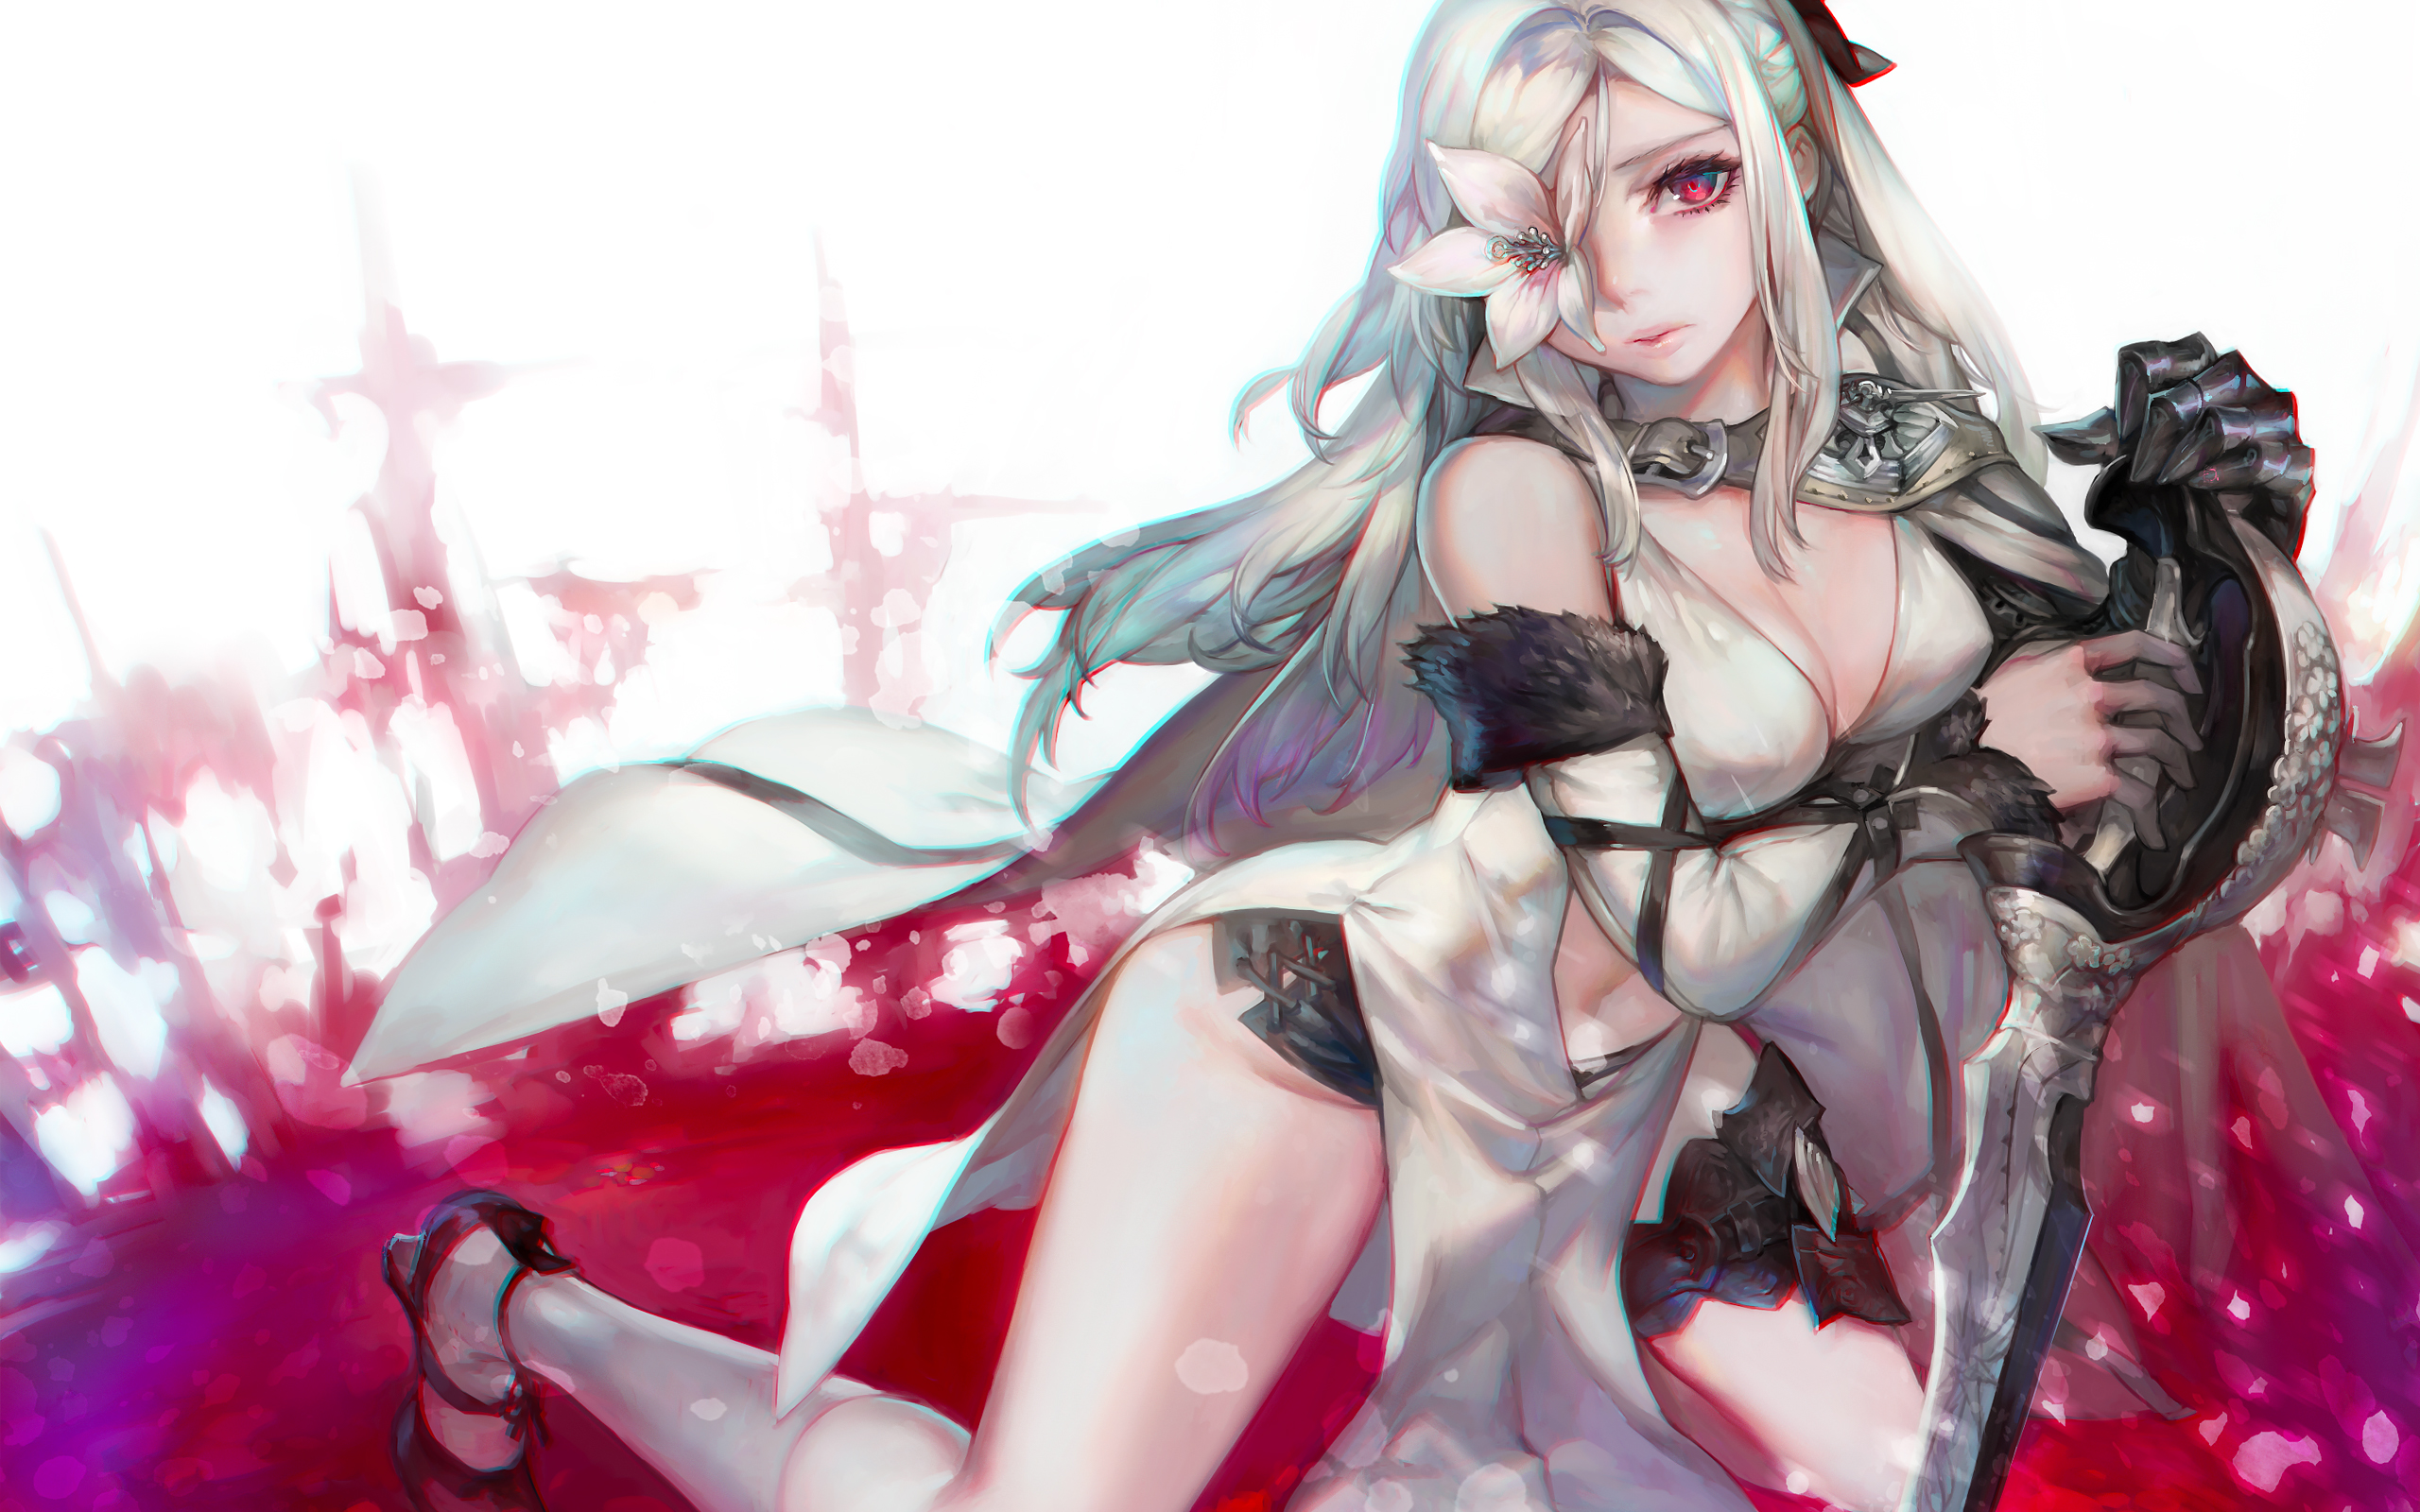 Drakengard 3 Hd Wallpaper - Drakengard 3 , HD Wallpaper & Backgrounds